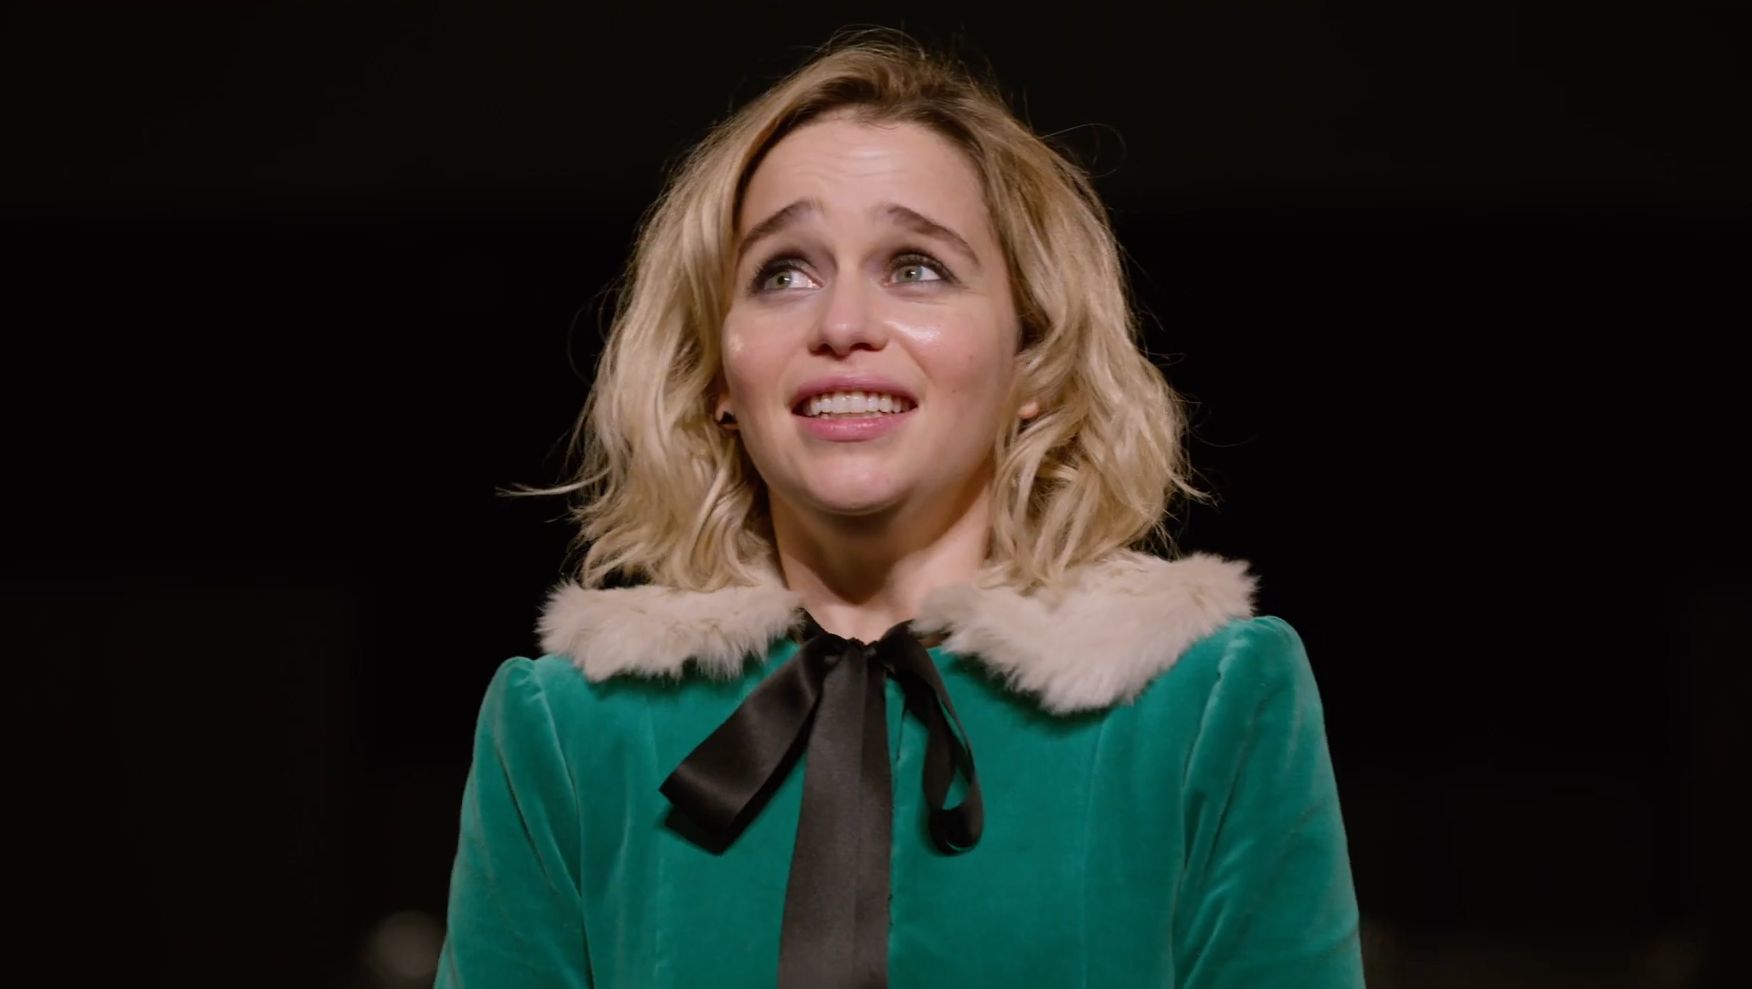 See Emilia Clarke Sing Last Christmas And Have A Bird Poop On Her Face